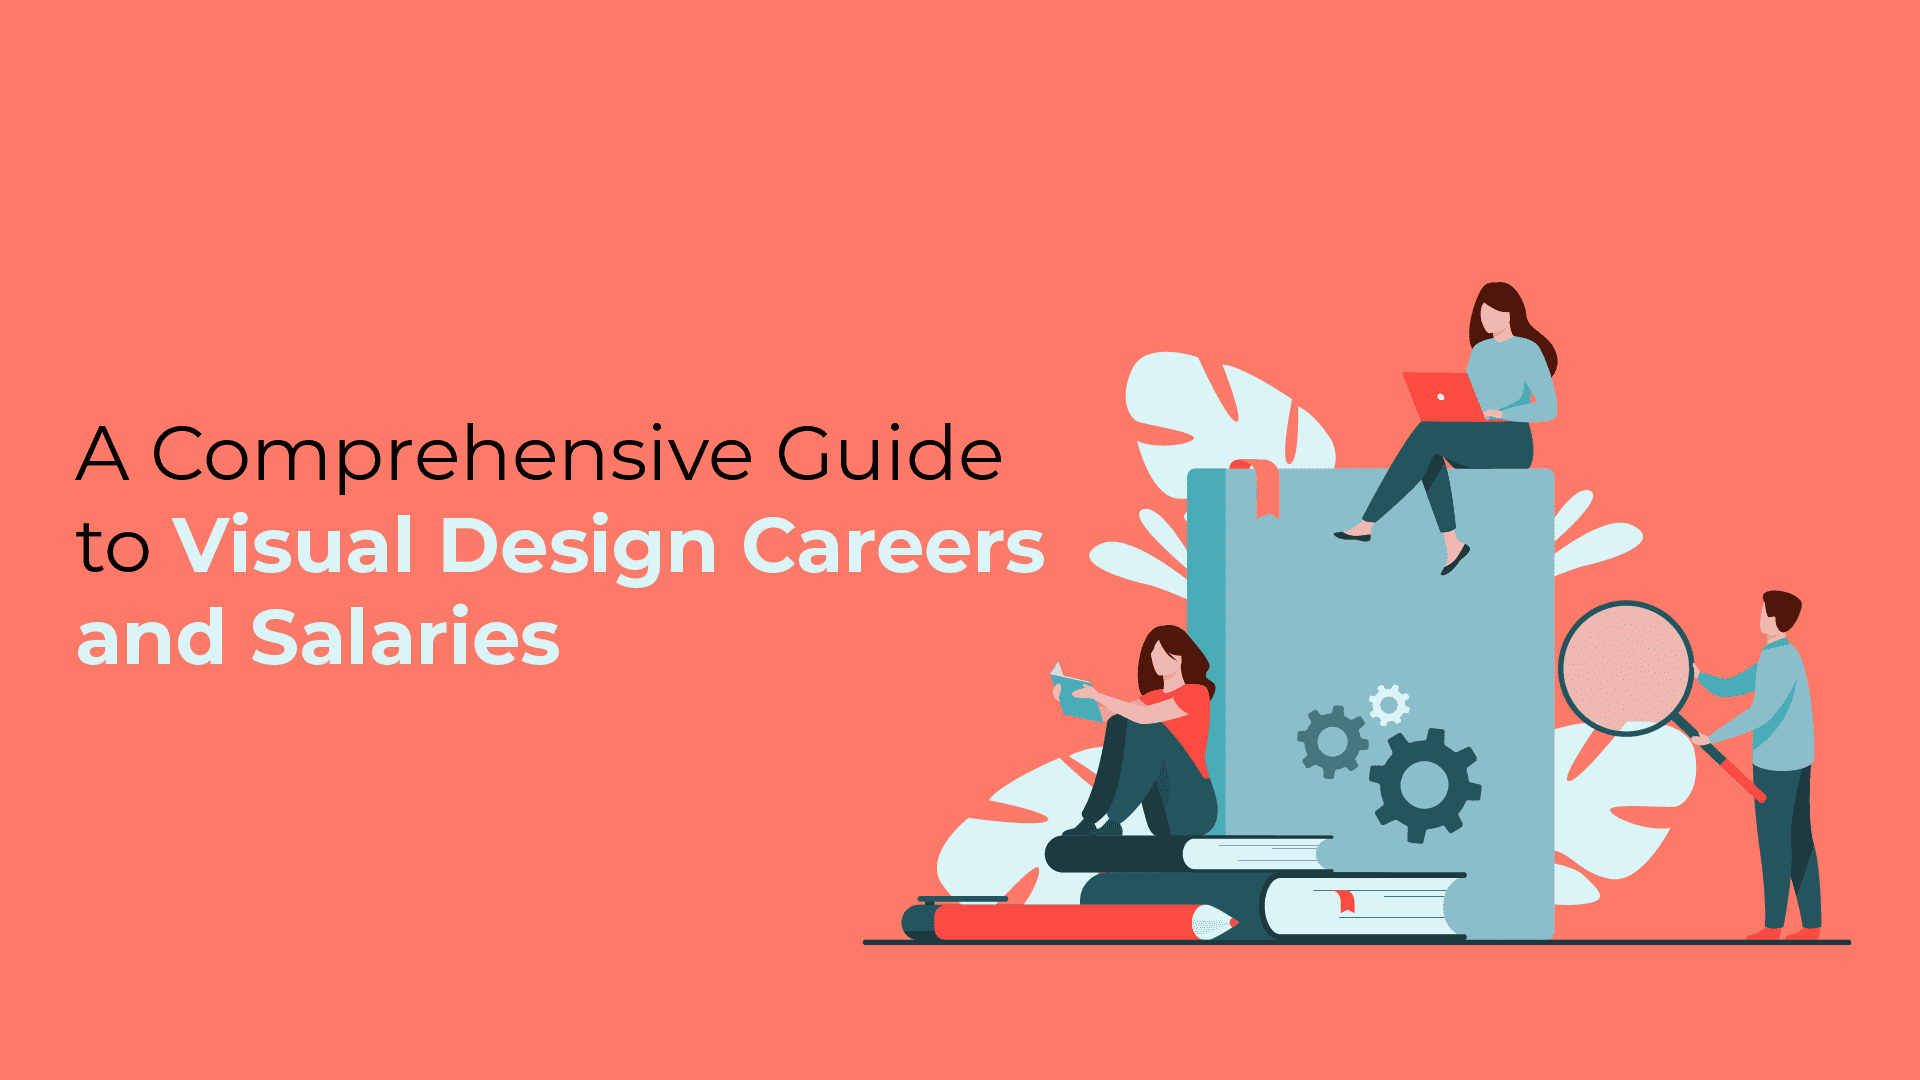 A Comprehensive Guide to Visual Design Careers and Salaries